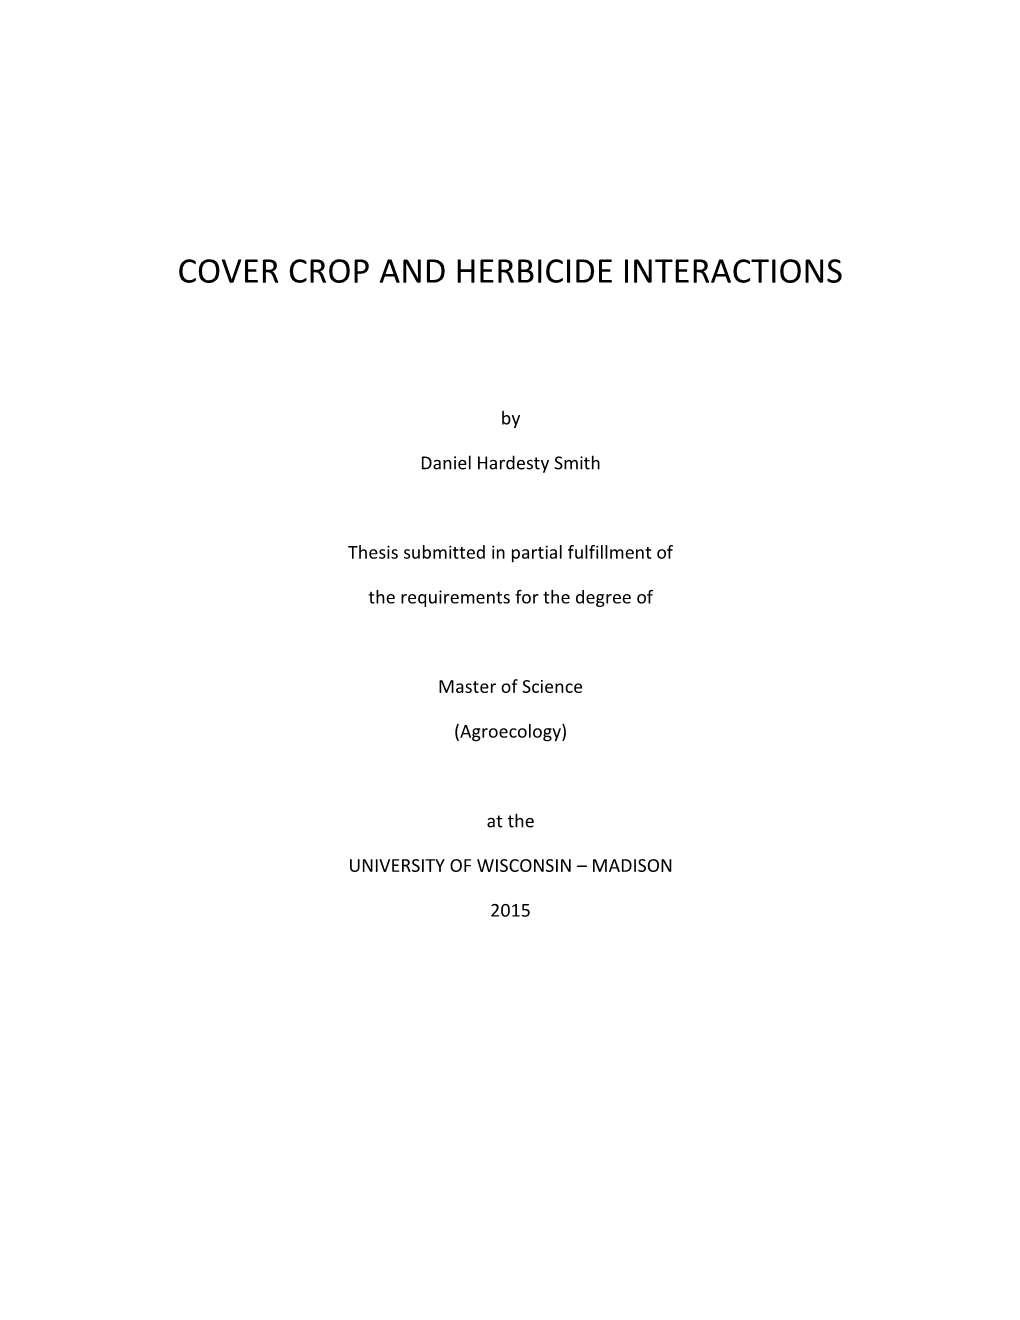 Cover Crop and Herbicide Interactions